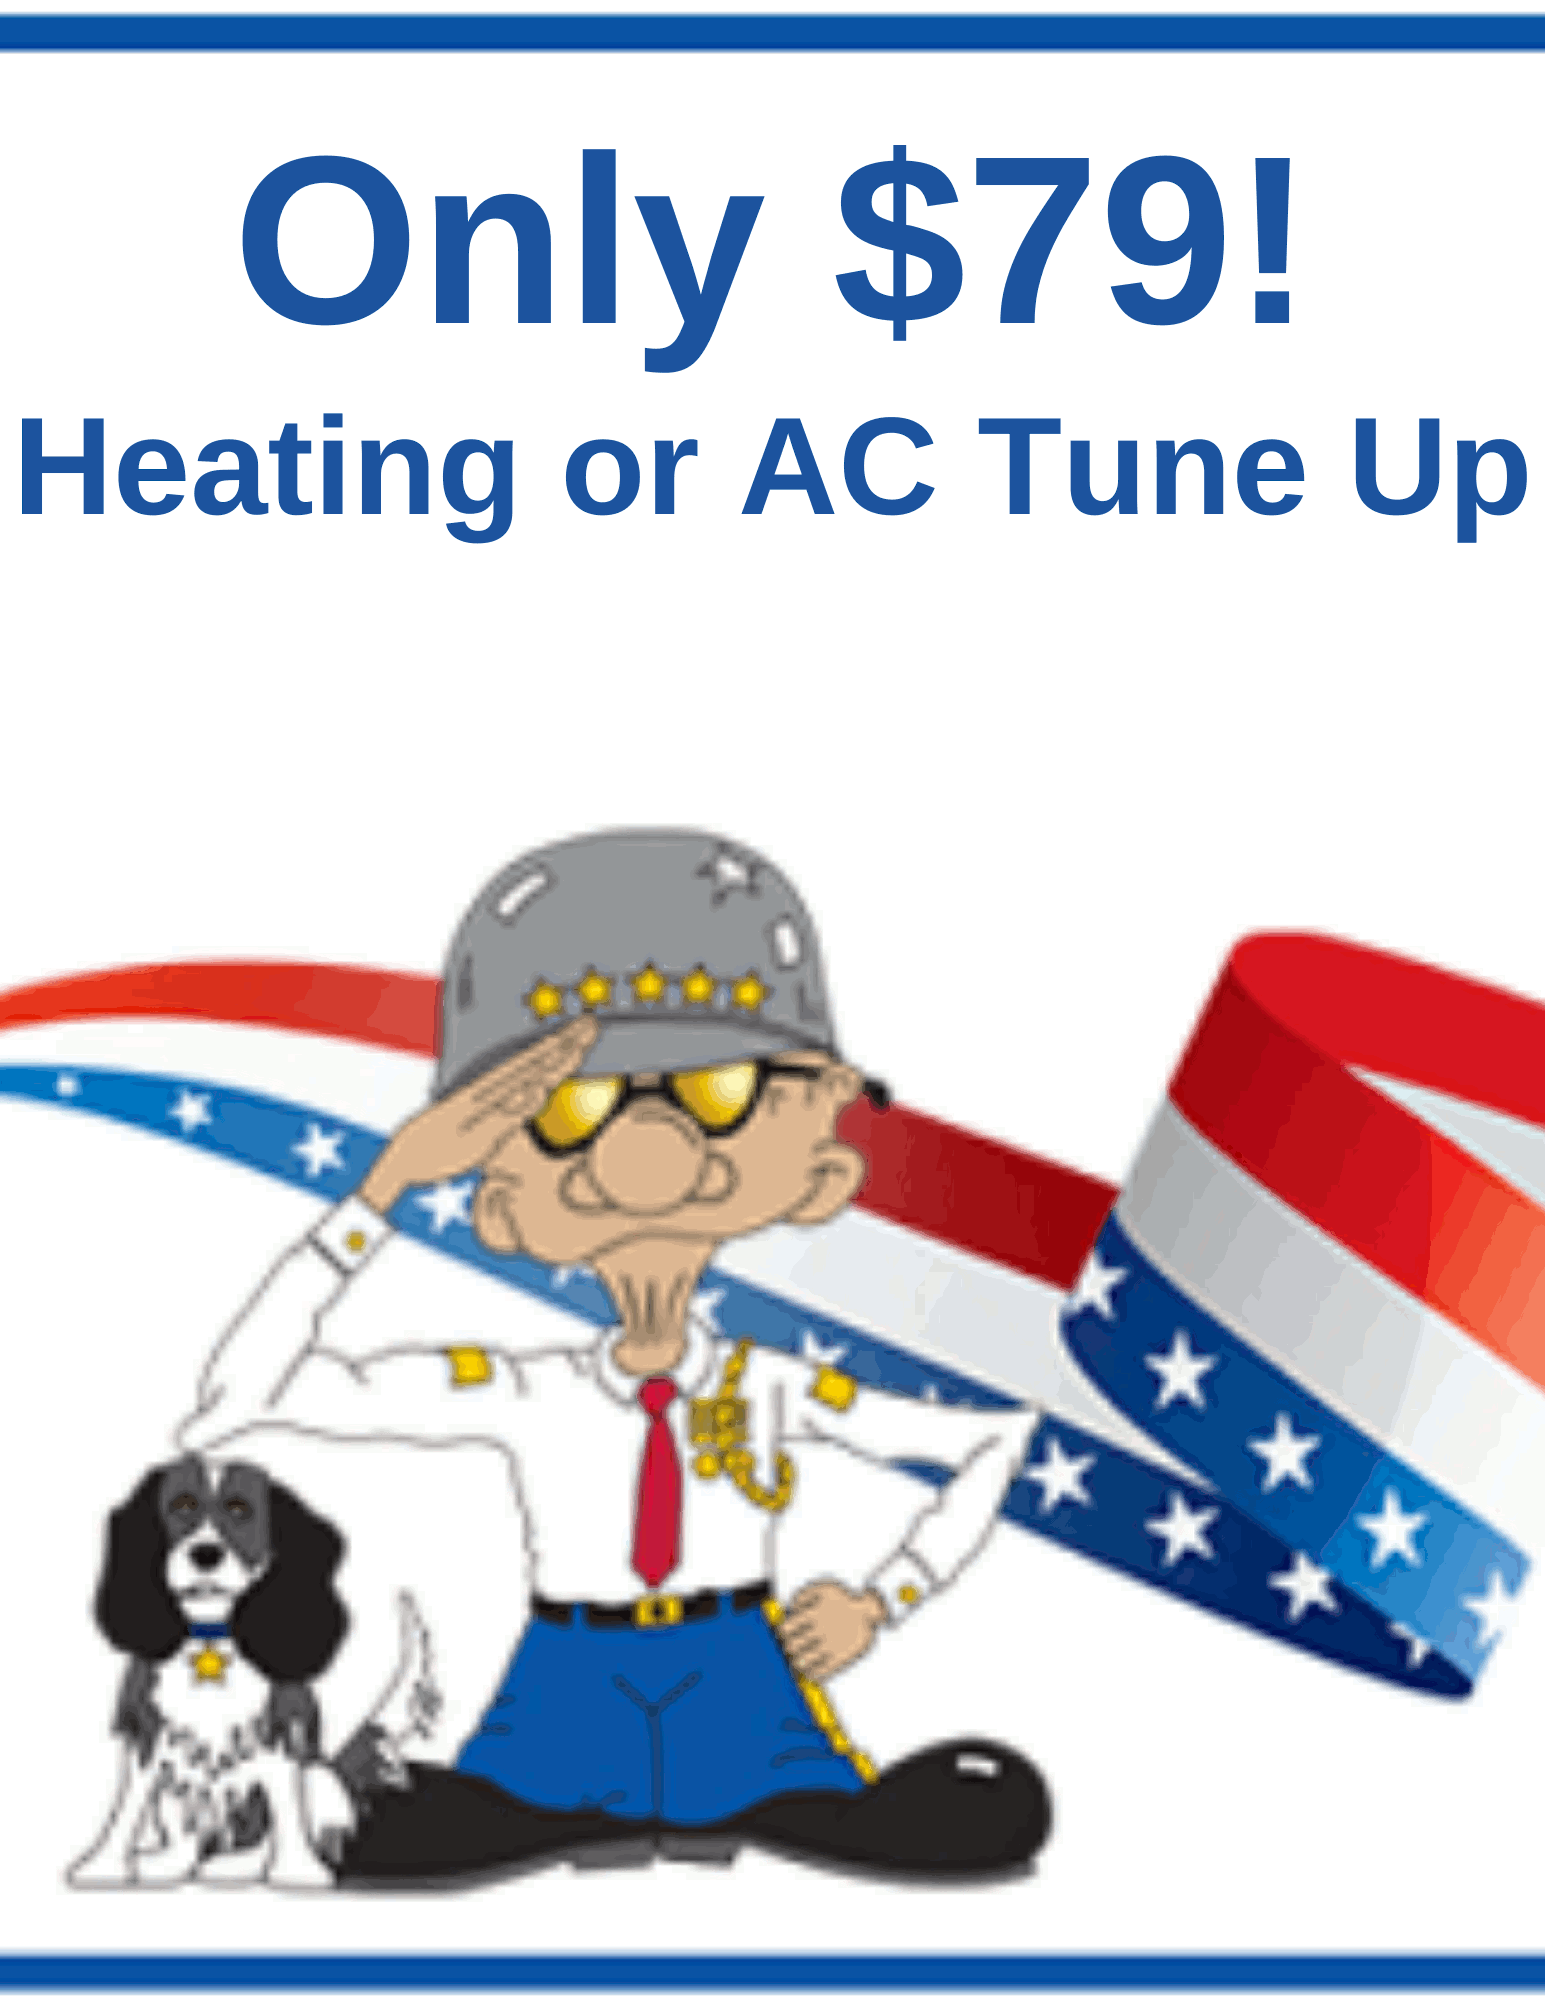 heating ac tune up coupon $79 General Air Conditioning & Plumbing